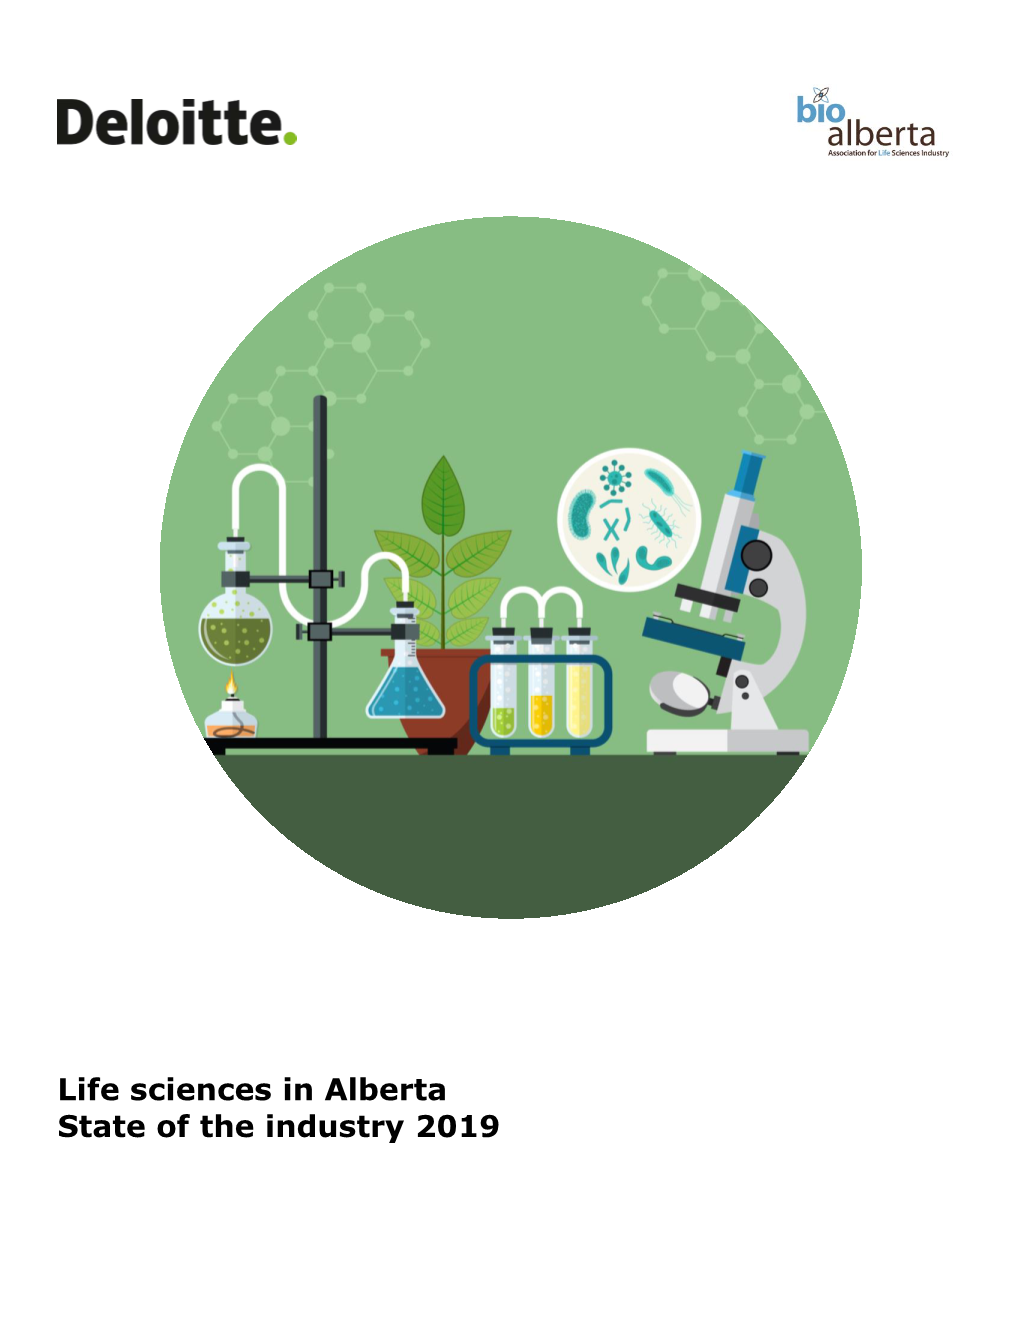 Life Sciences in Alberta State of the Industry 2019